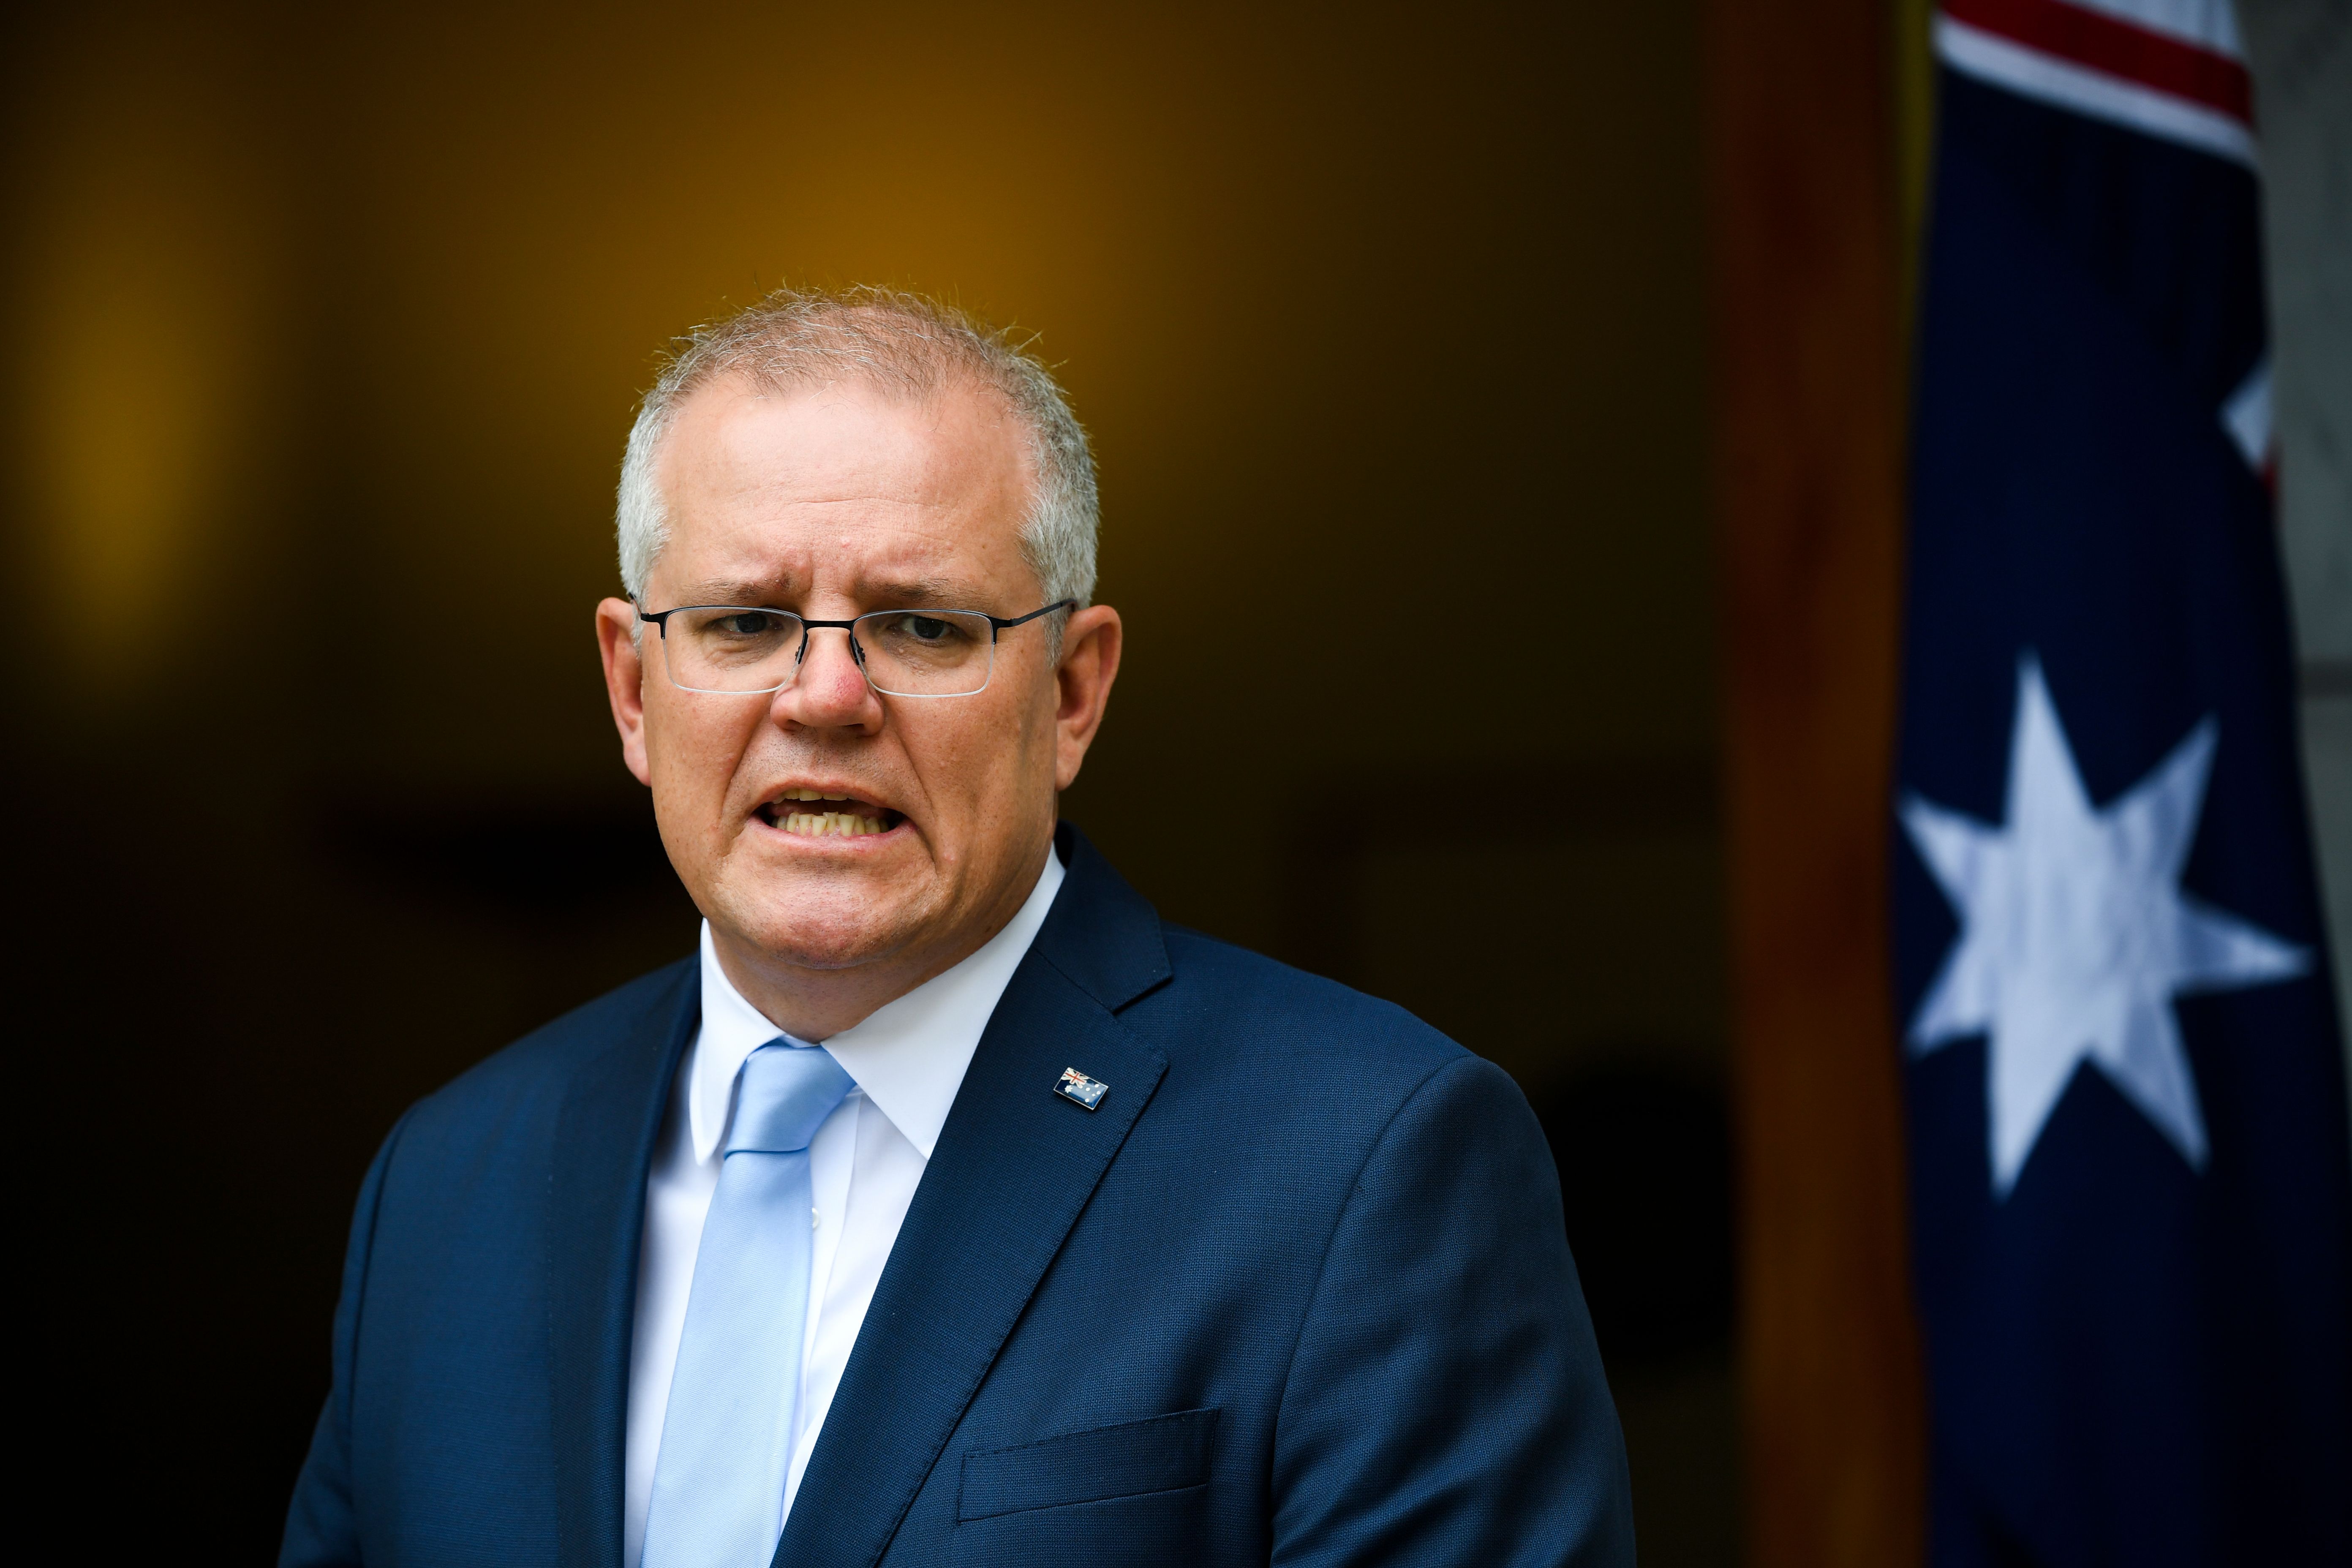 Australian Prime Minister Scott Morrison speaks to the media during a news conference at Parliament House in Canberra, Australia, on January 8.